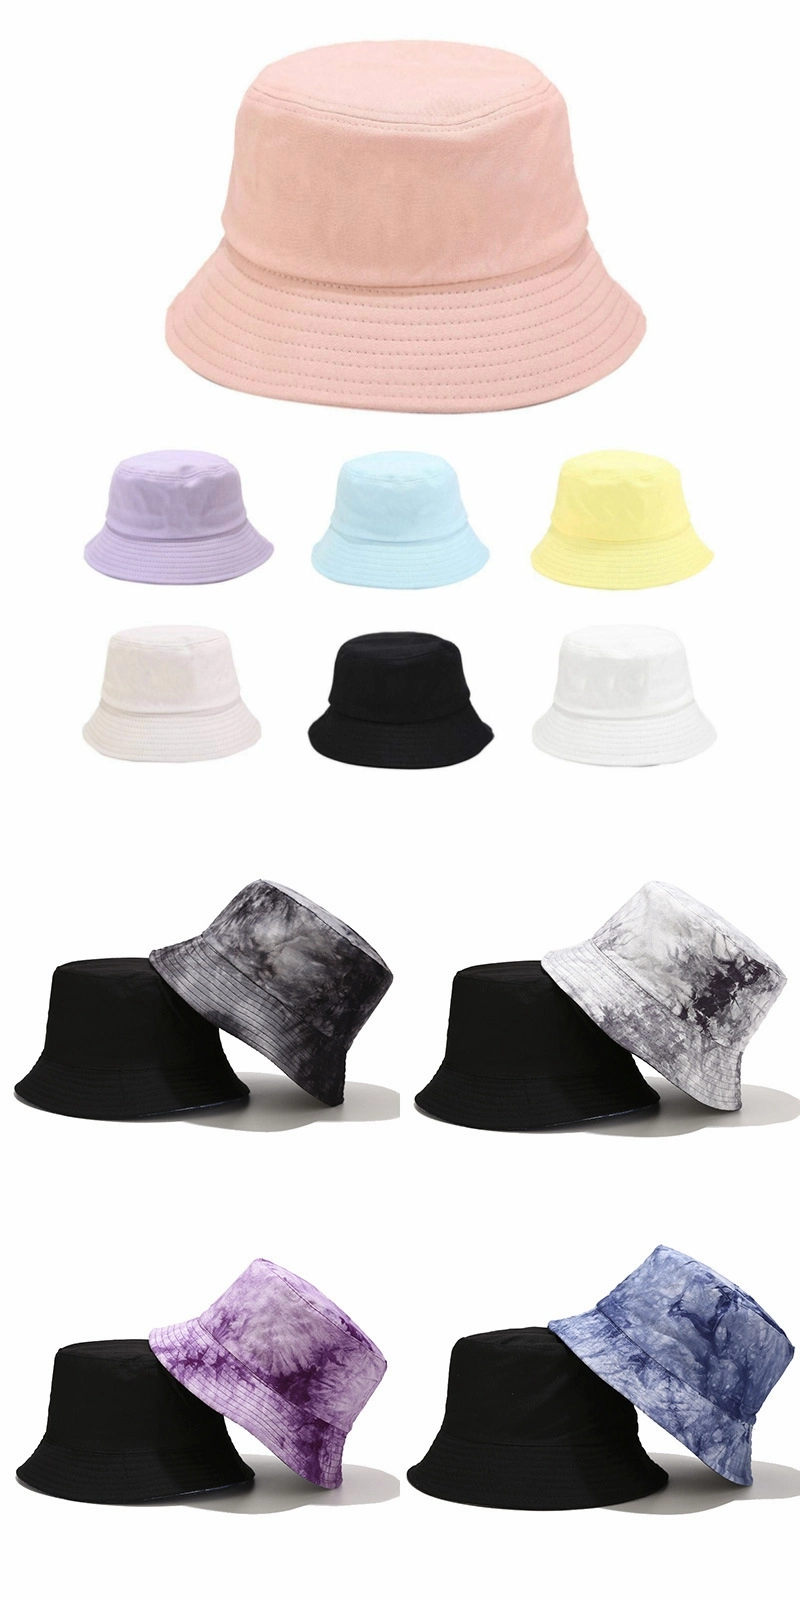 Spring Summer 2020 Women Bucket Caps Sunscreen Soft and Foldable Cotton Fisherman Hats